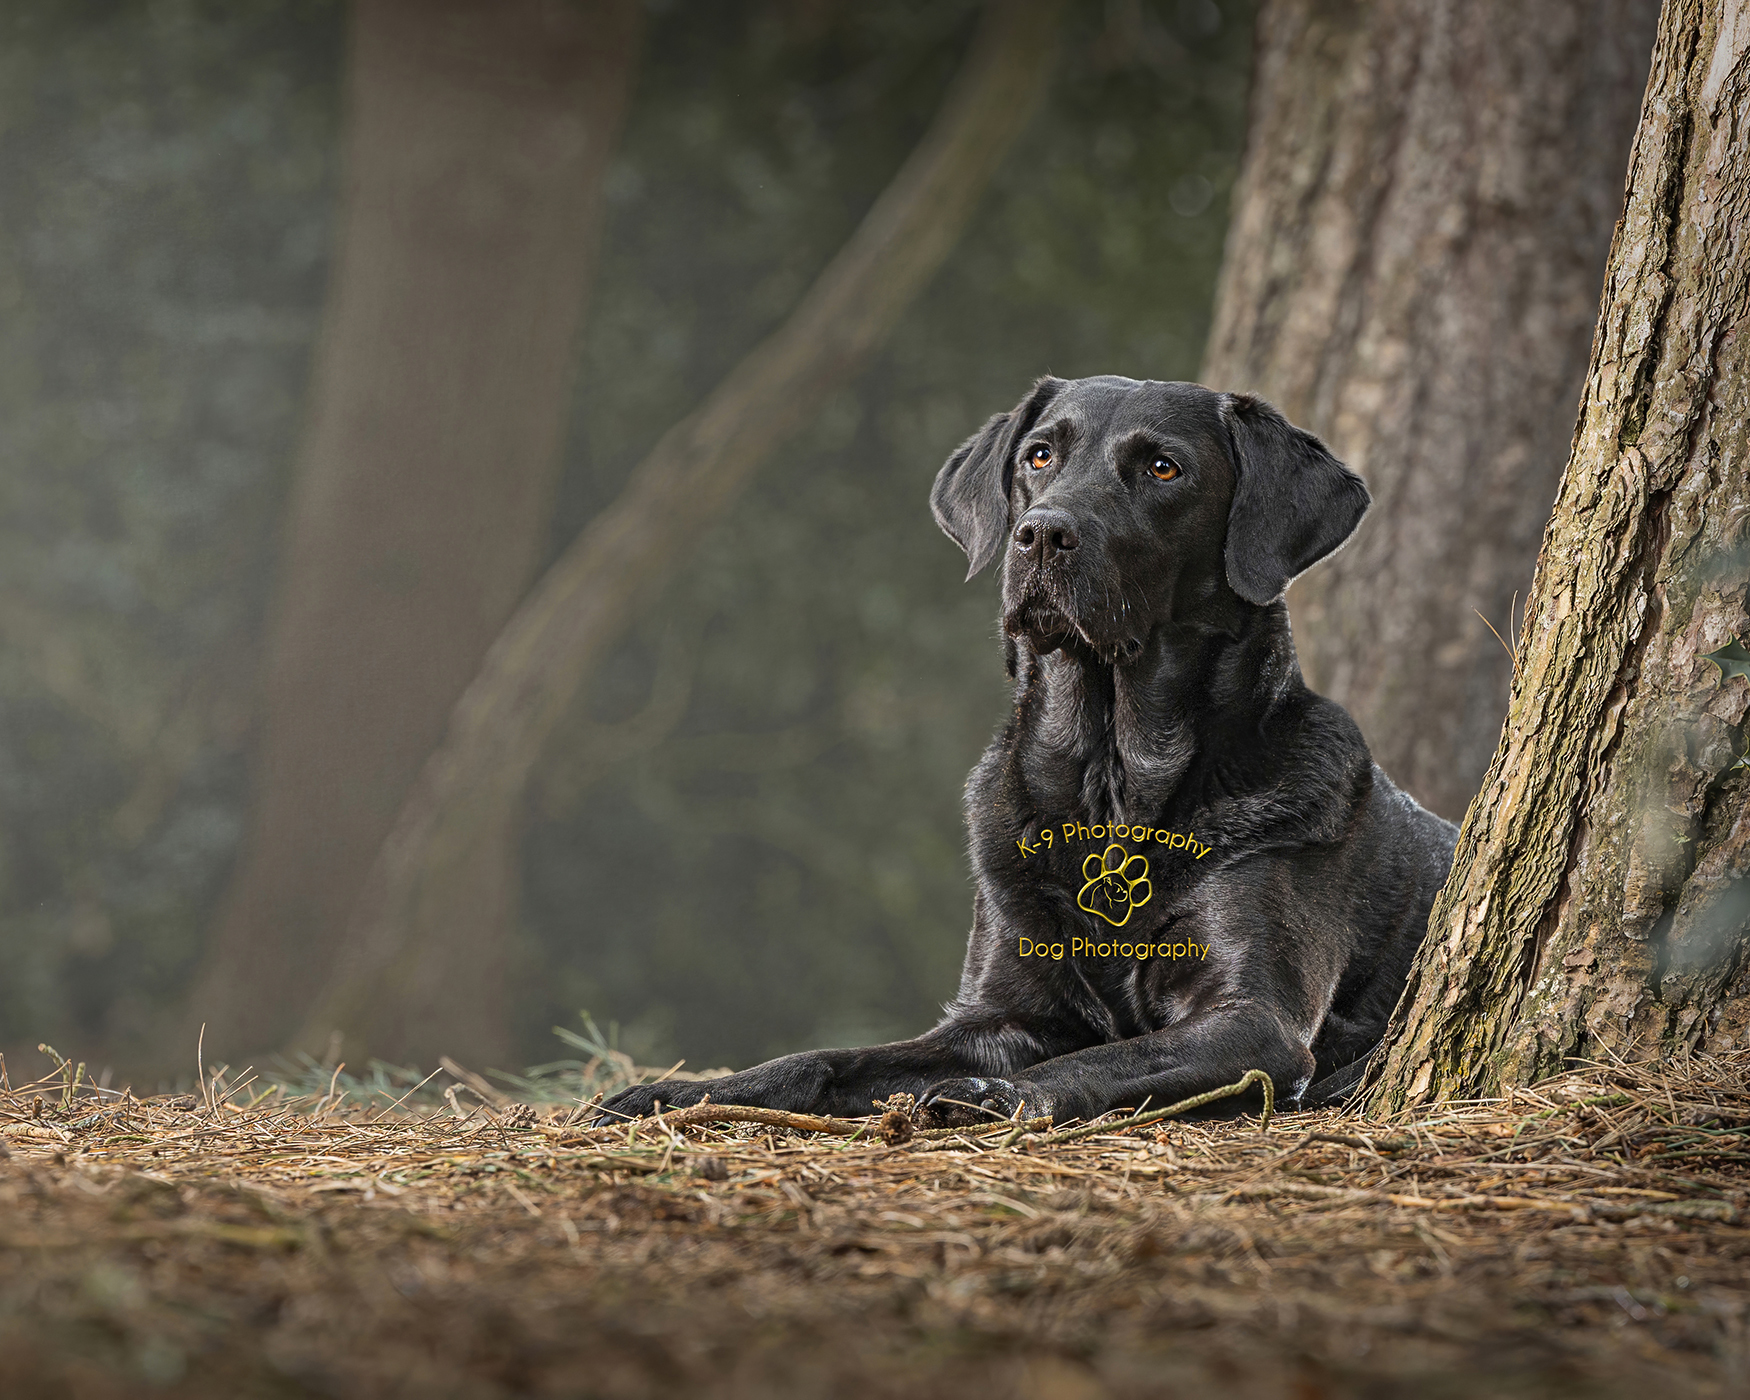 Beautiful dog photography of a black Labrador on location by specialist dog photographer Adrian Bullers